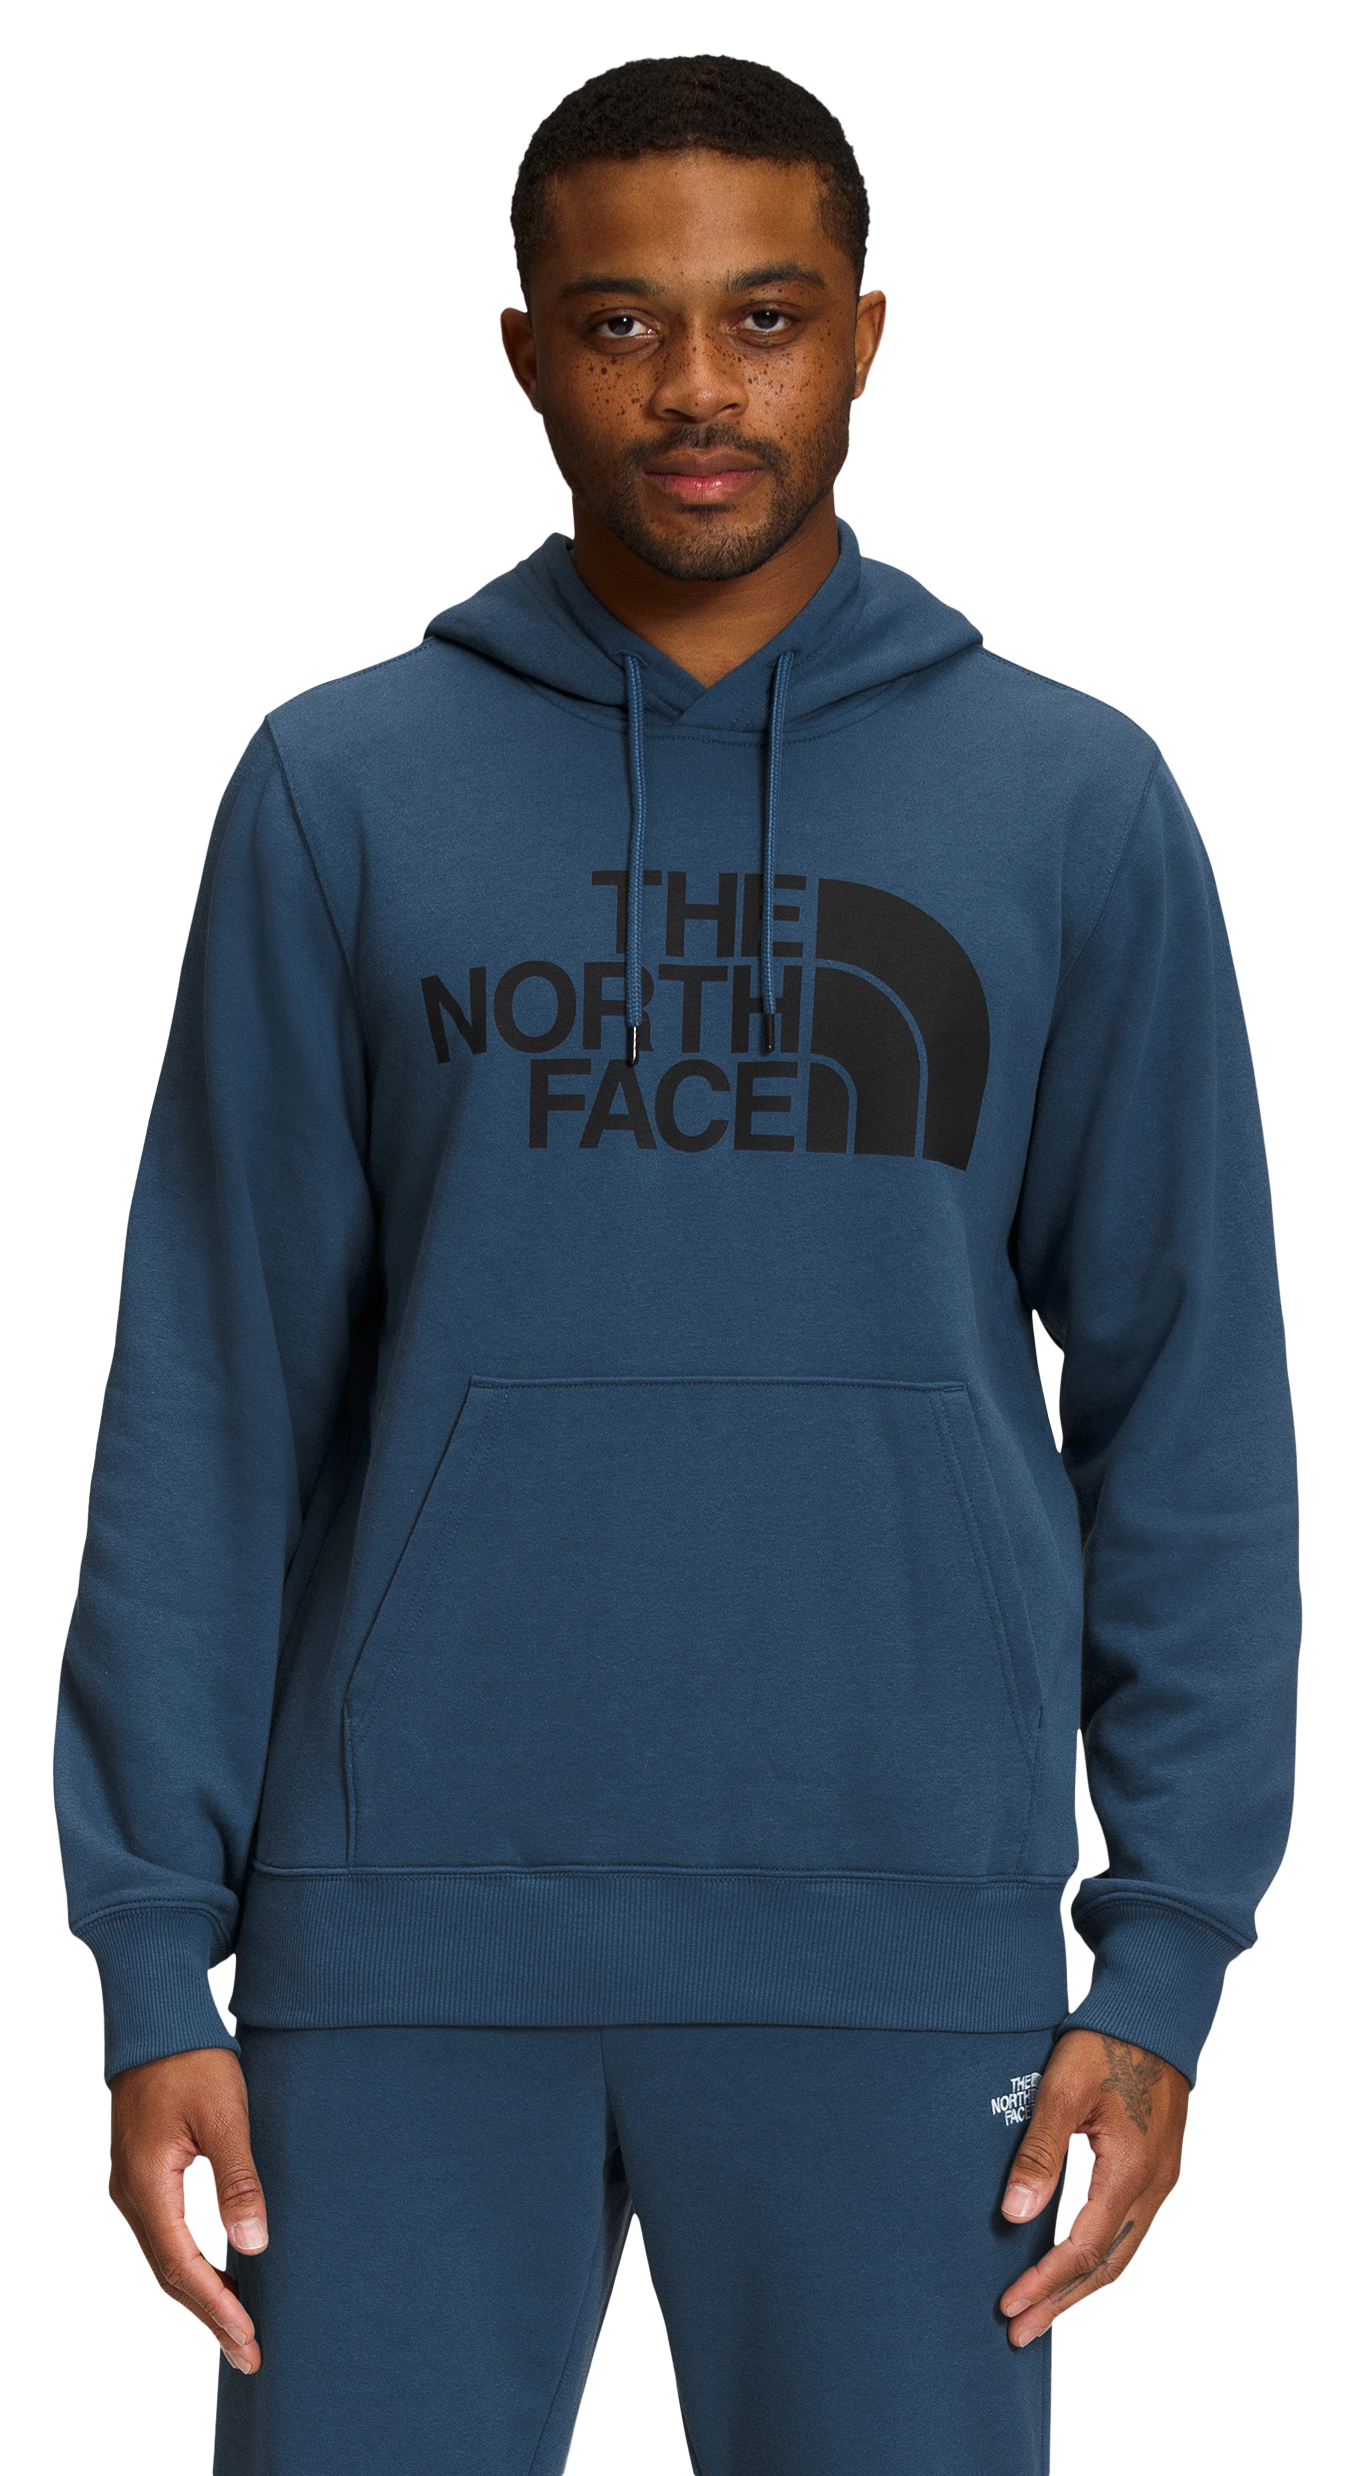 The North Face Half Dome Pullover Long-Sleeve Hoodie for Men - Shady Blue/TNF Black - 2XL